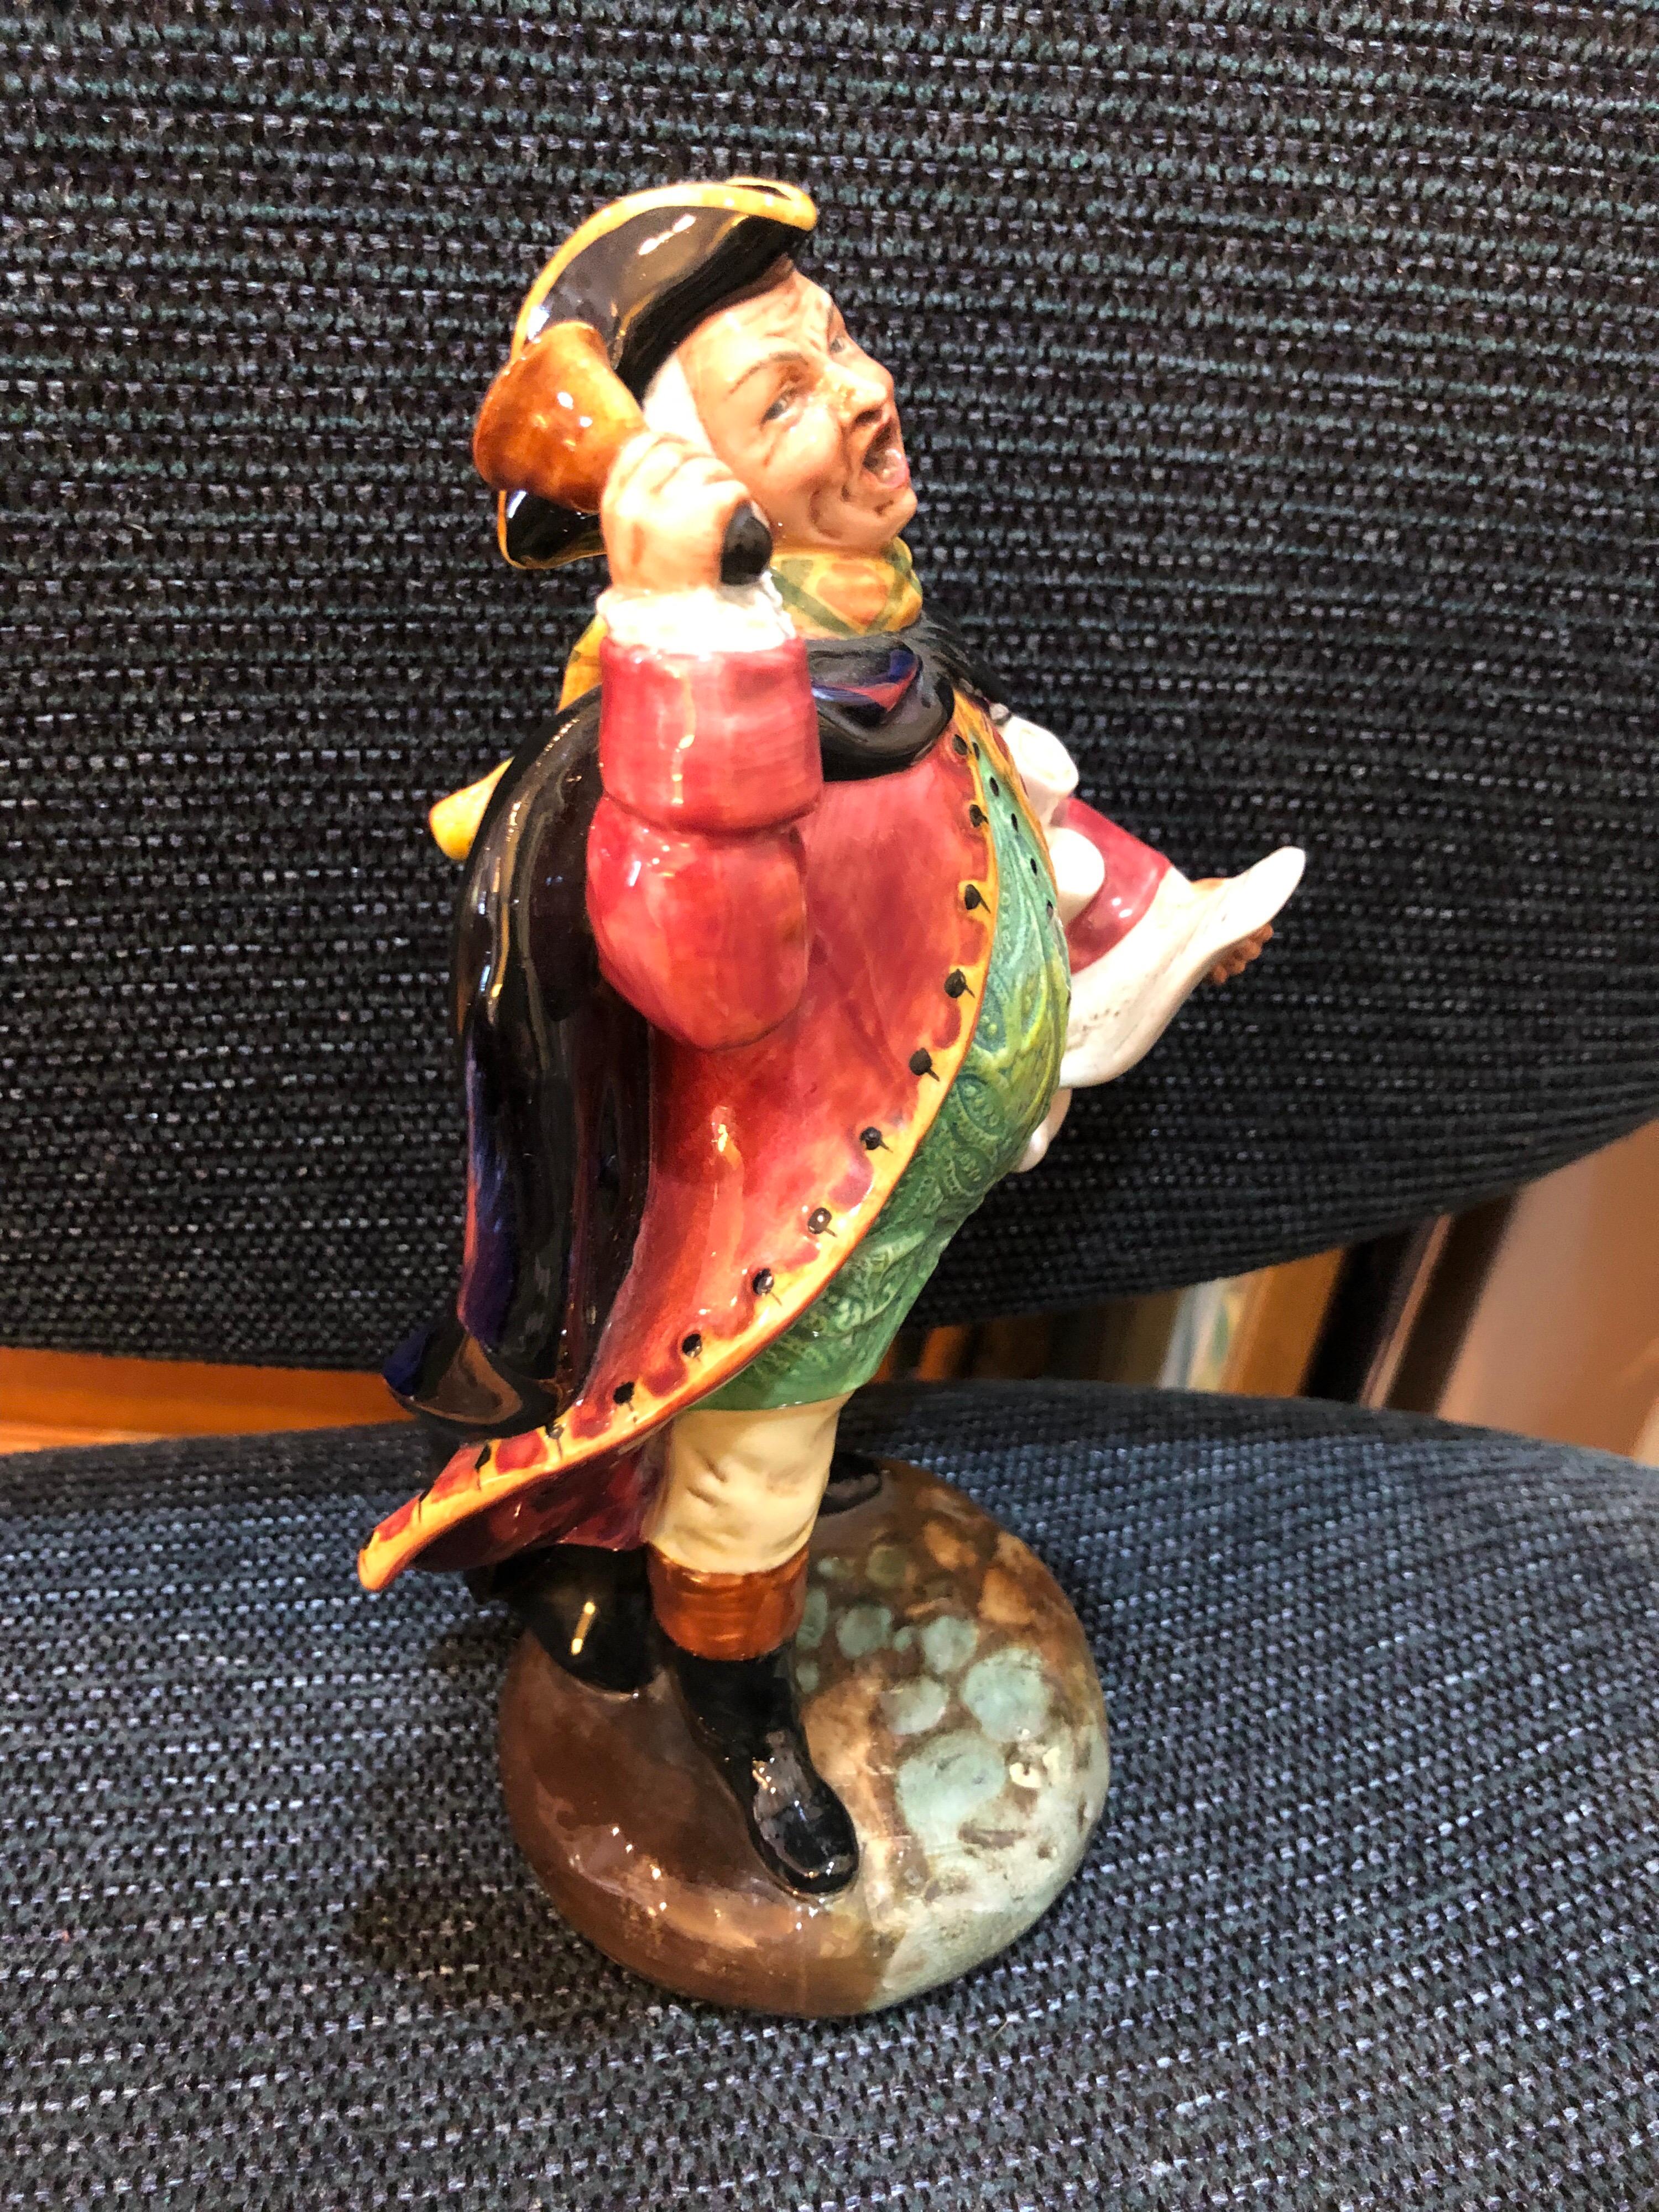 Royal Daulton figurine of a Town Crier. Amazing colors and glaze to this exceptional piece. Perfect addiction to your collection of Royal Daulton figurines.